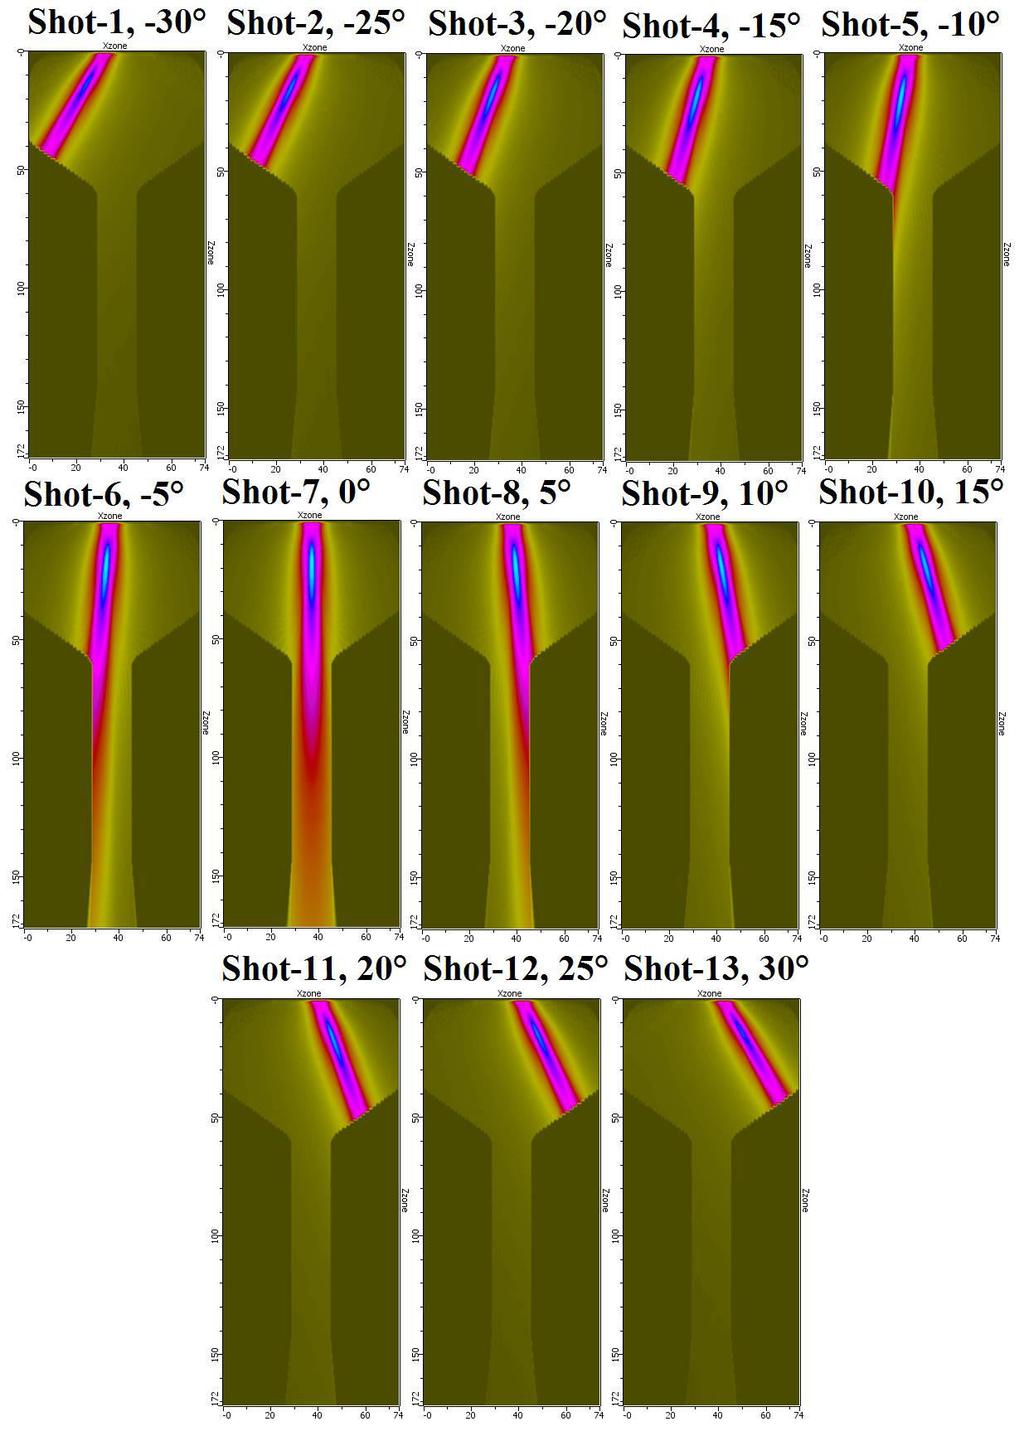 From fig.3.6, we have a clear representation of each shot that was triggered by PA2 (Wedge1). As we observe, the triggering starts with shot-1 at -30 and ends with shot-13 at +30 respectively.